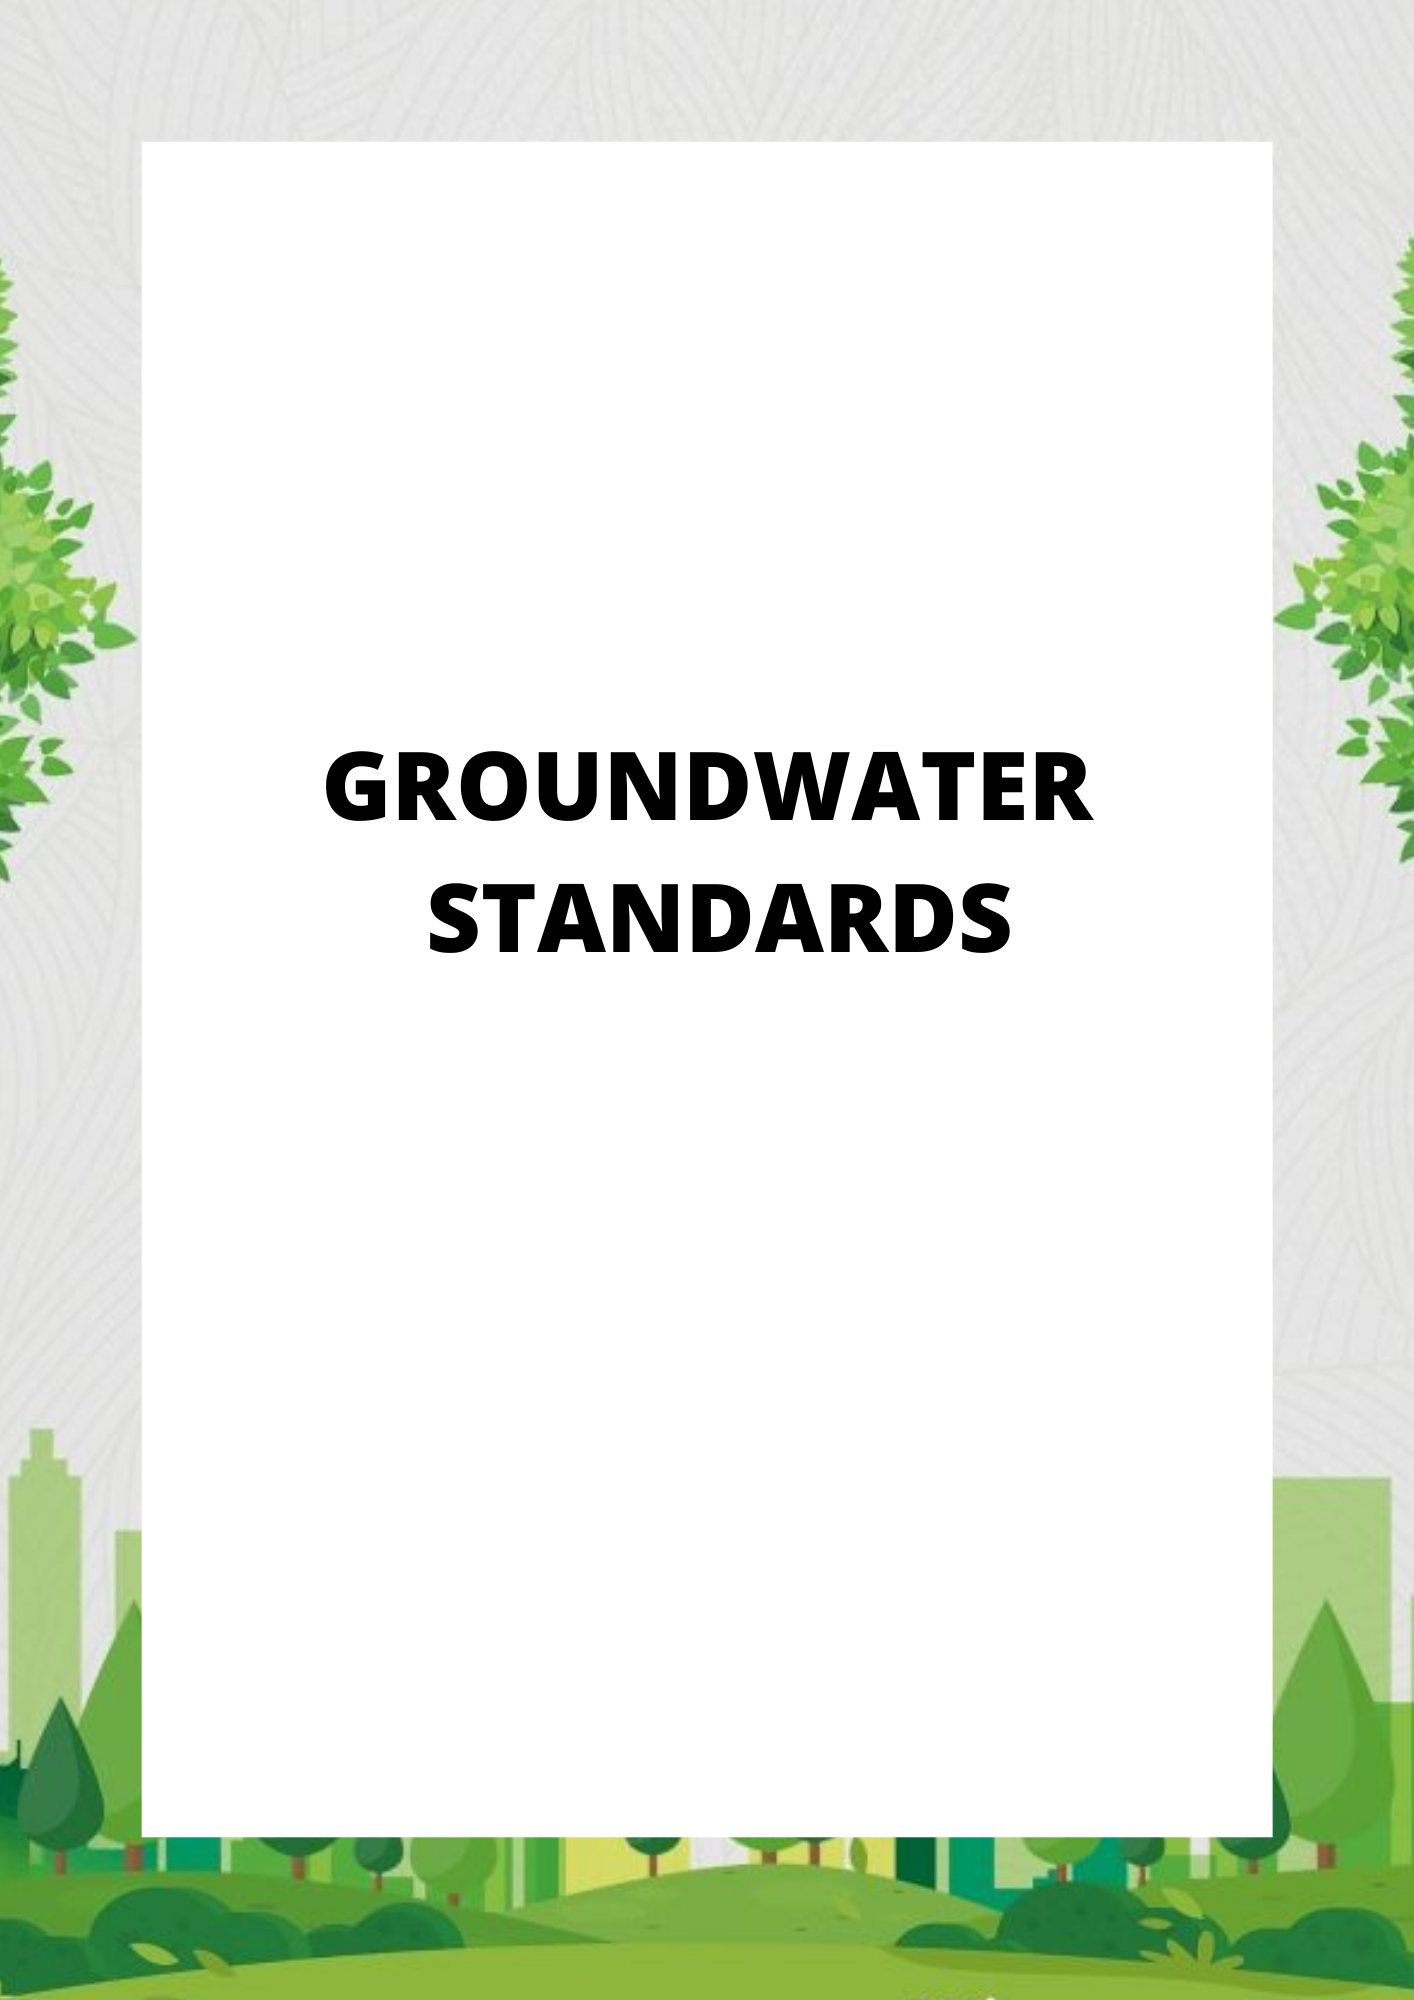 GROUNDWATER STANDARDS